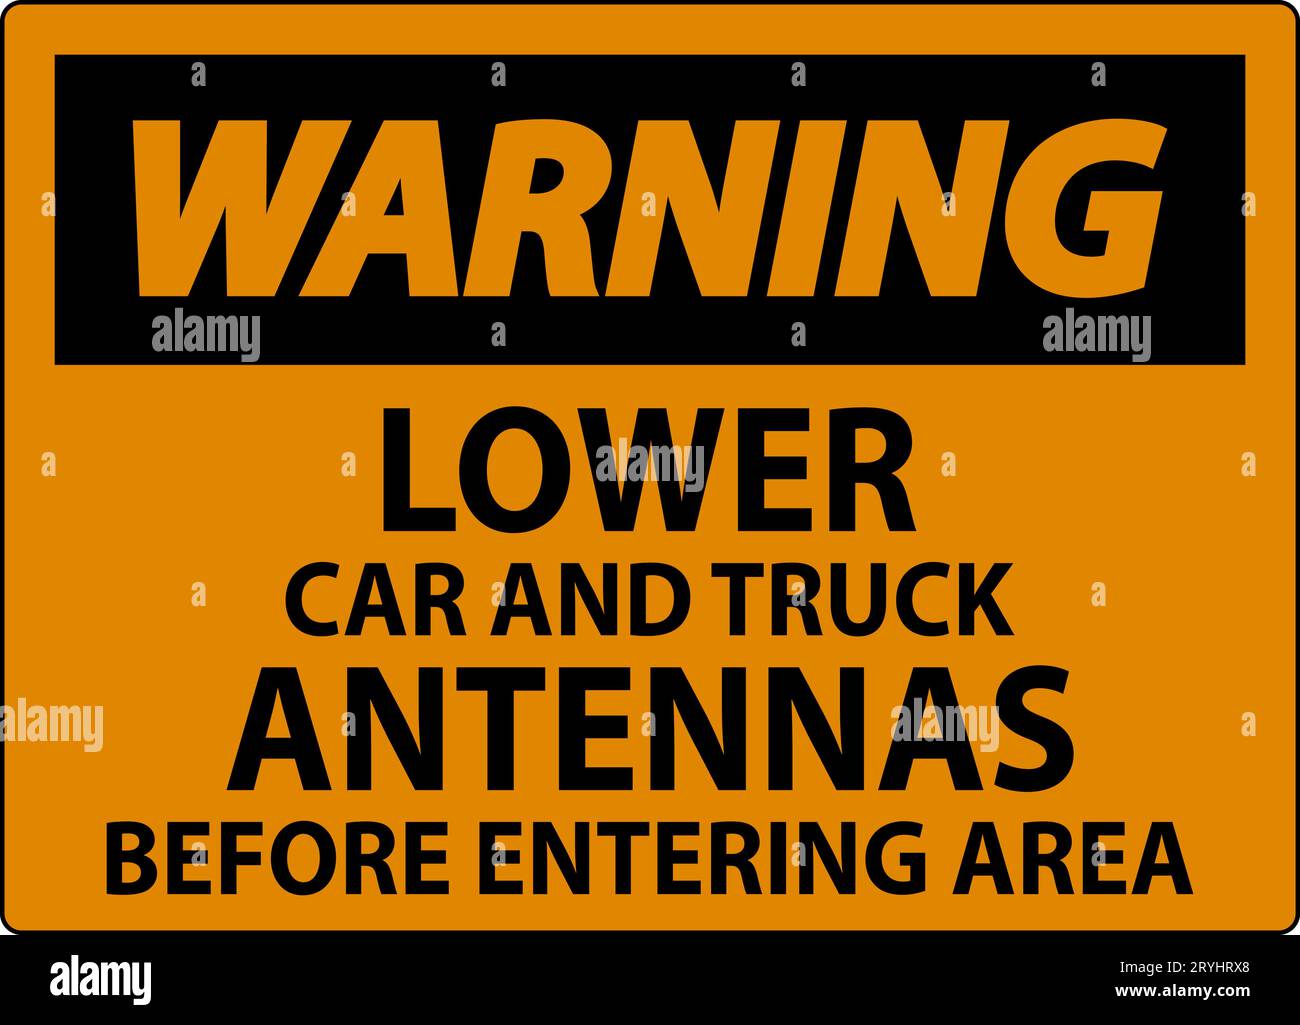 Warning Sign Lower Car And Truck Antennas Before Entering Area Stock Vector